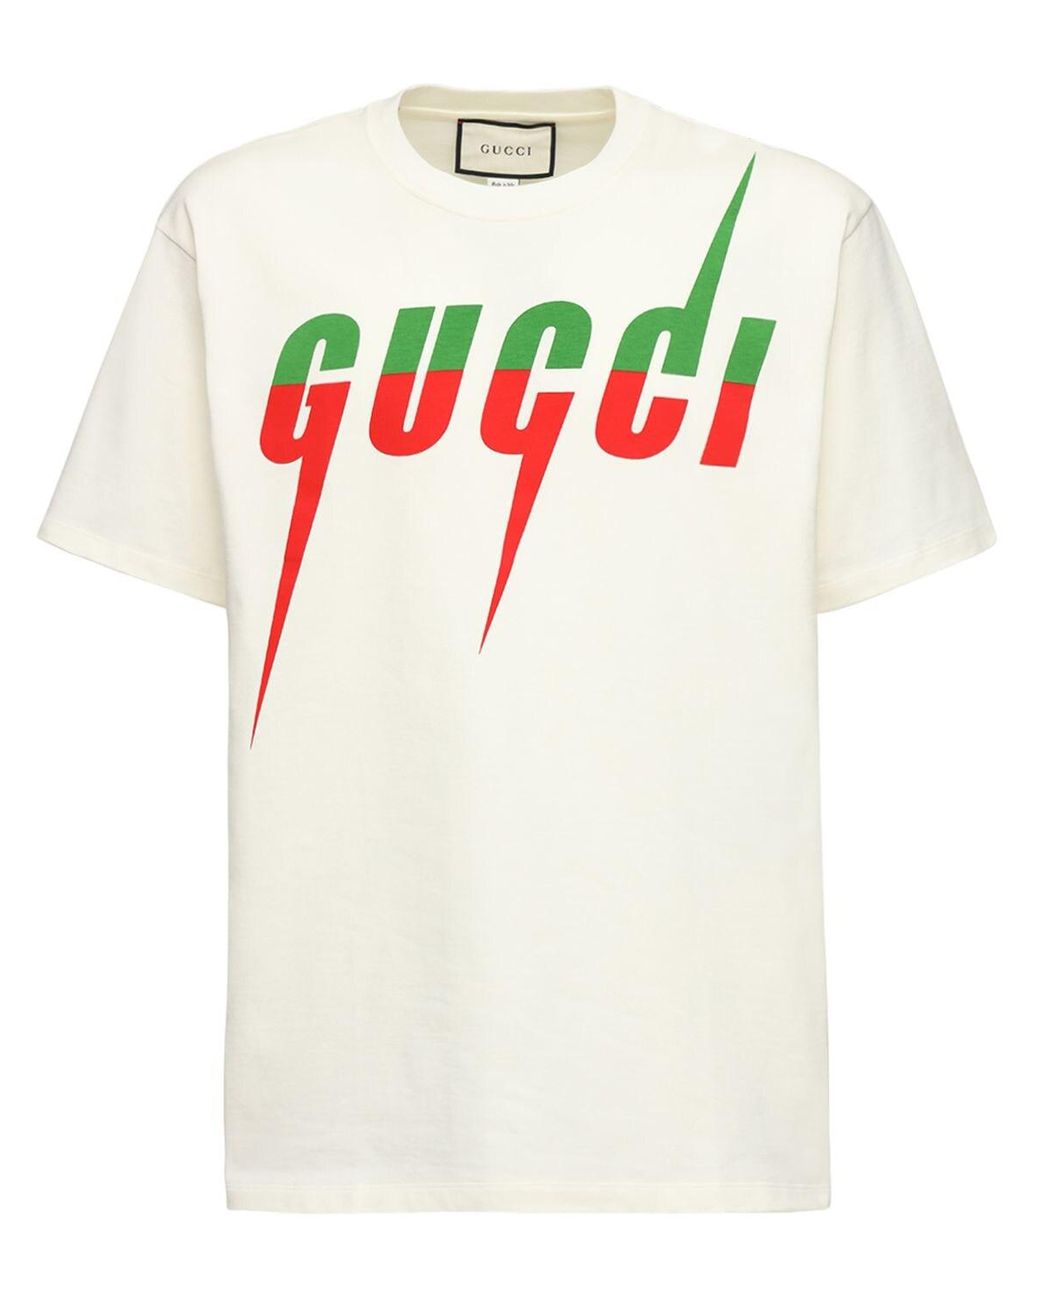 Gucci Cotton Blade T-shirt for Men - Save 42% - Lyst